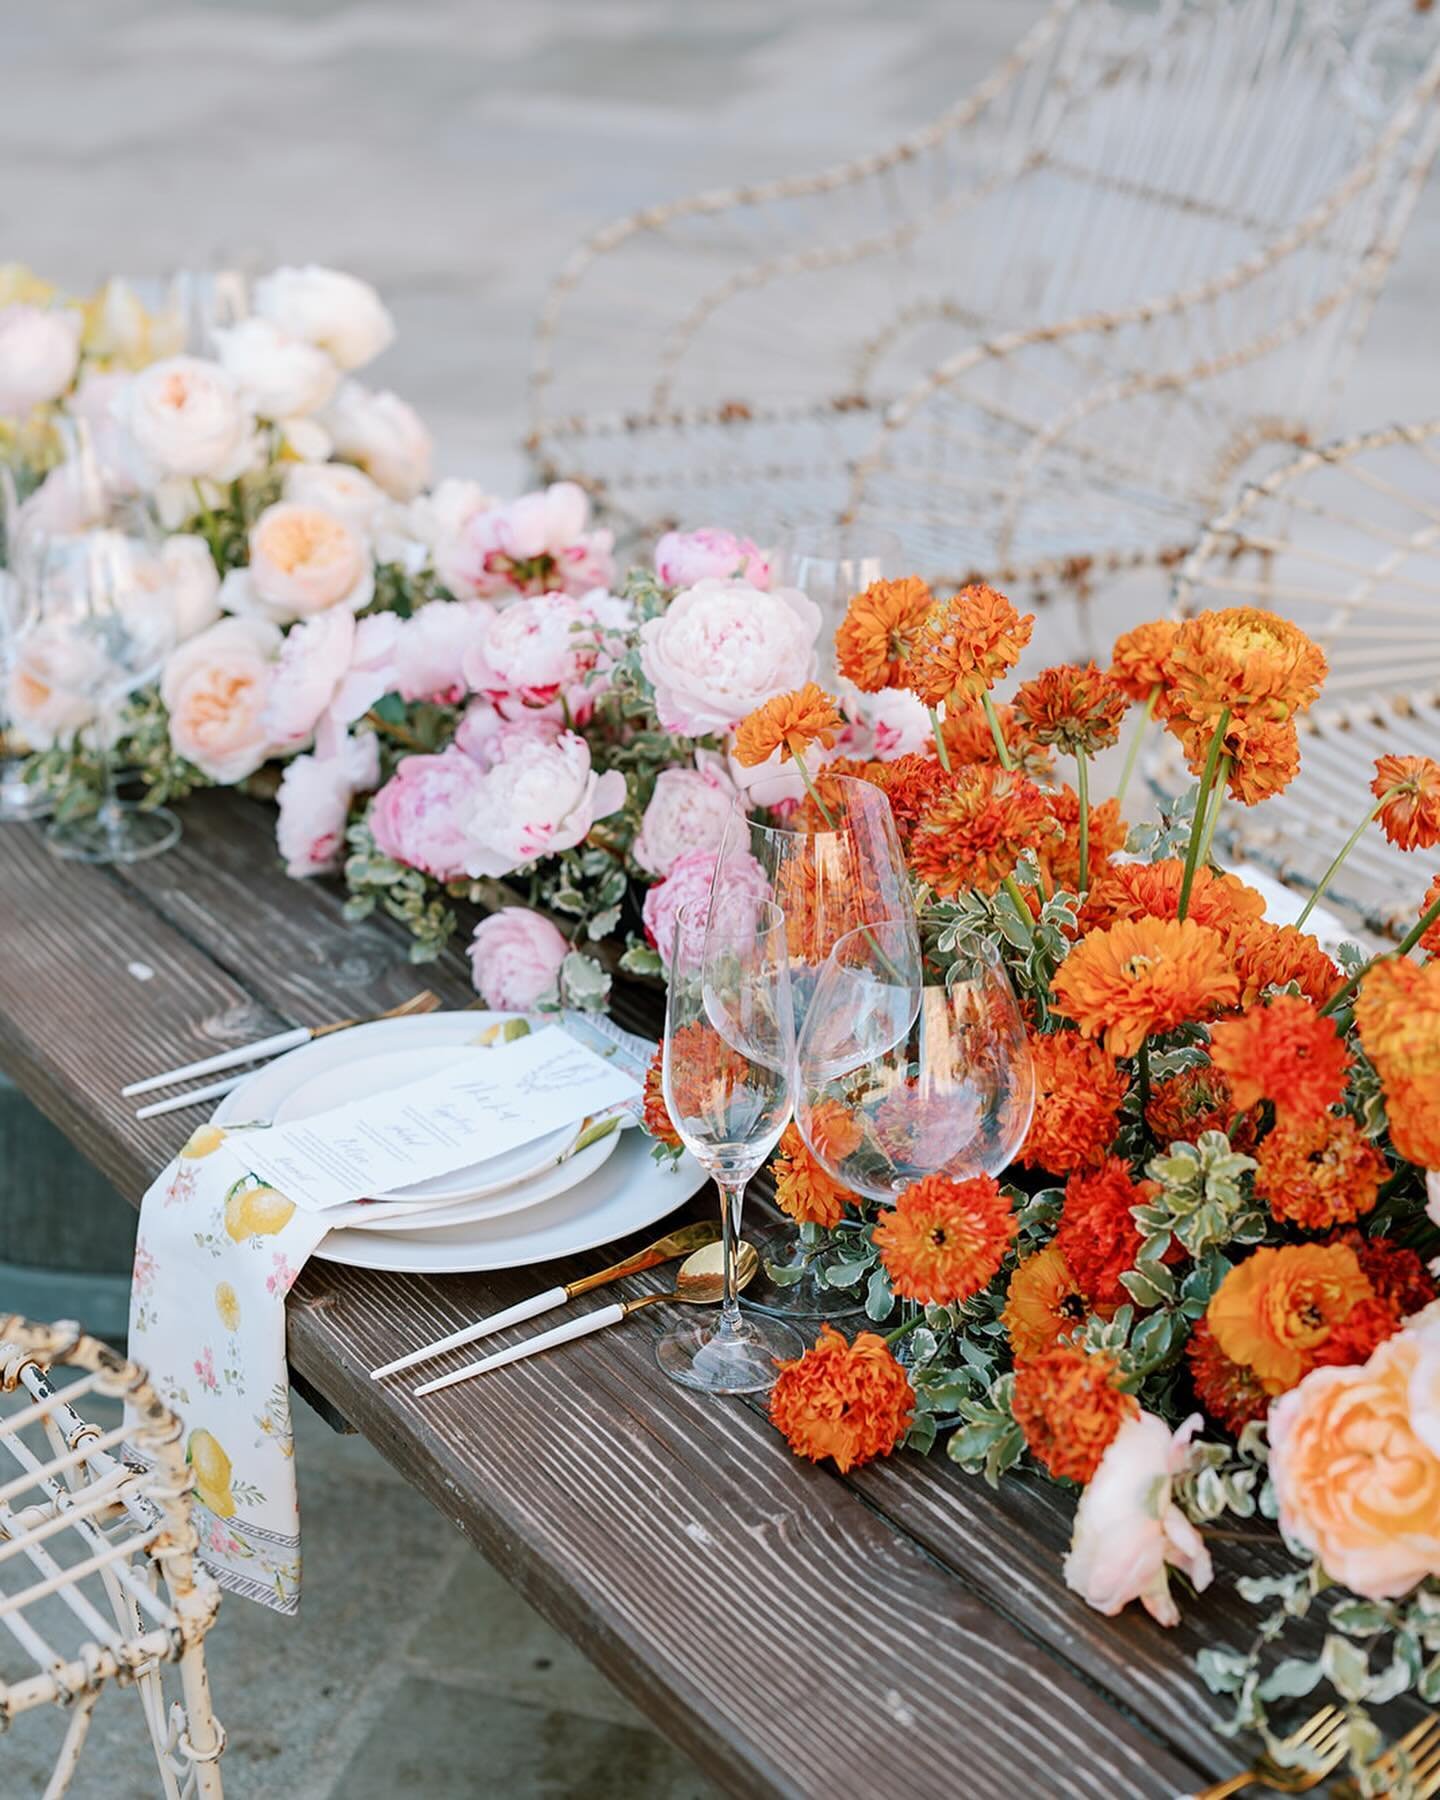 Lush floral tablescape - elegant, fun and flirty! 

Host: @styledshootsacrossamerica 
Planning: @heatherbengeofficial 
Assistant Planners: @alexiawoolumssaa @amodernfete @lacedwithgraceinfo @akbrides
Venue: @sunstonewinery @sunstonevilla 
Hair &amp; 